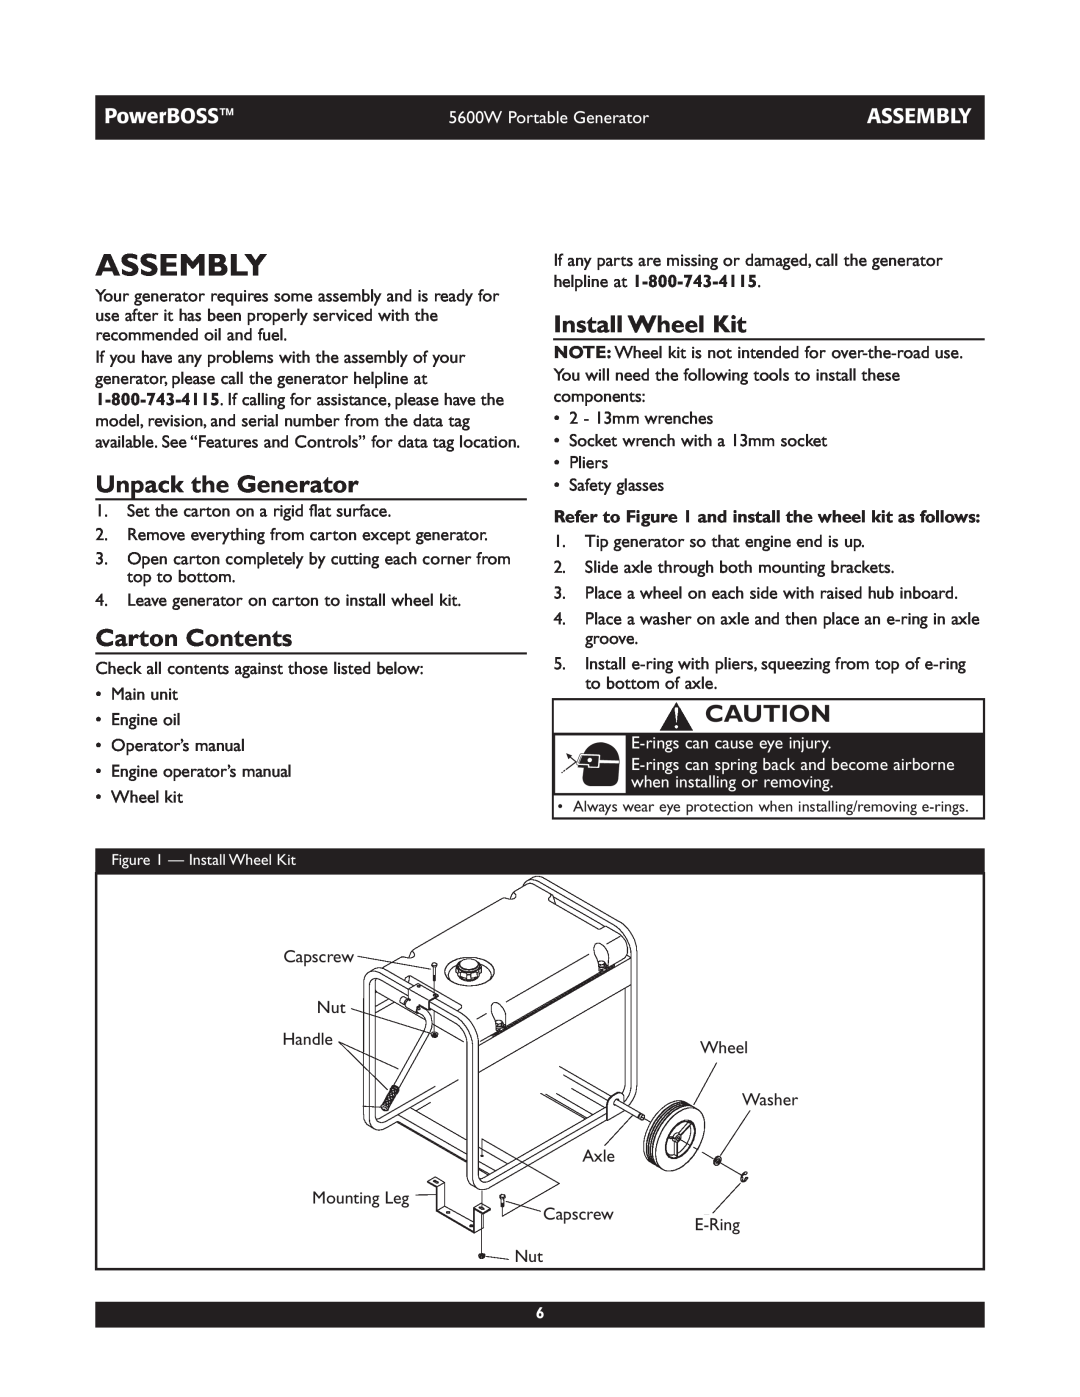 Briggs & Stratton 30230 Assembly, Unpack the Generator, Carton Contents, Install Wheel Kit, E-rings can cause eye injury 